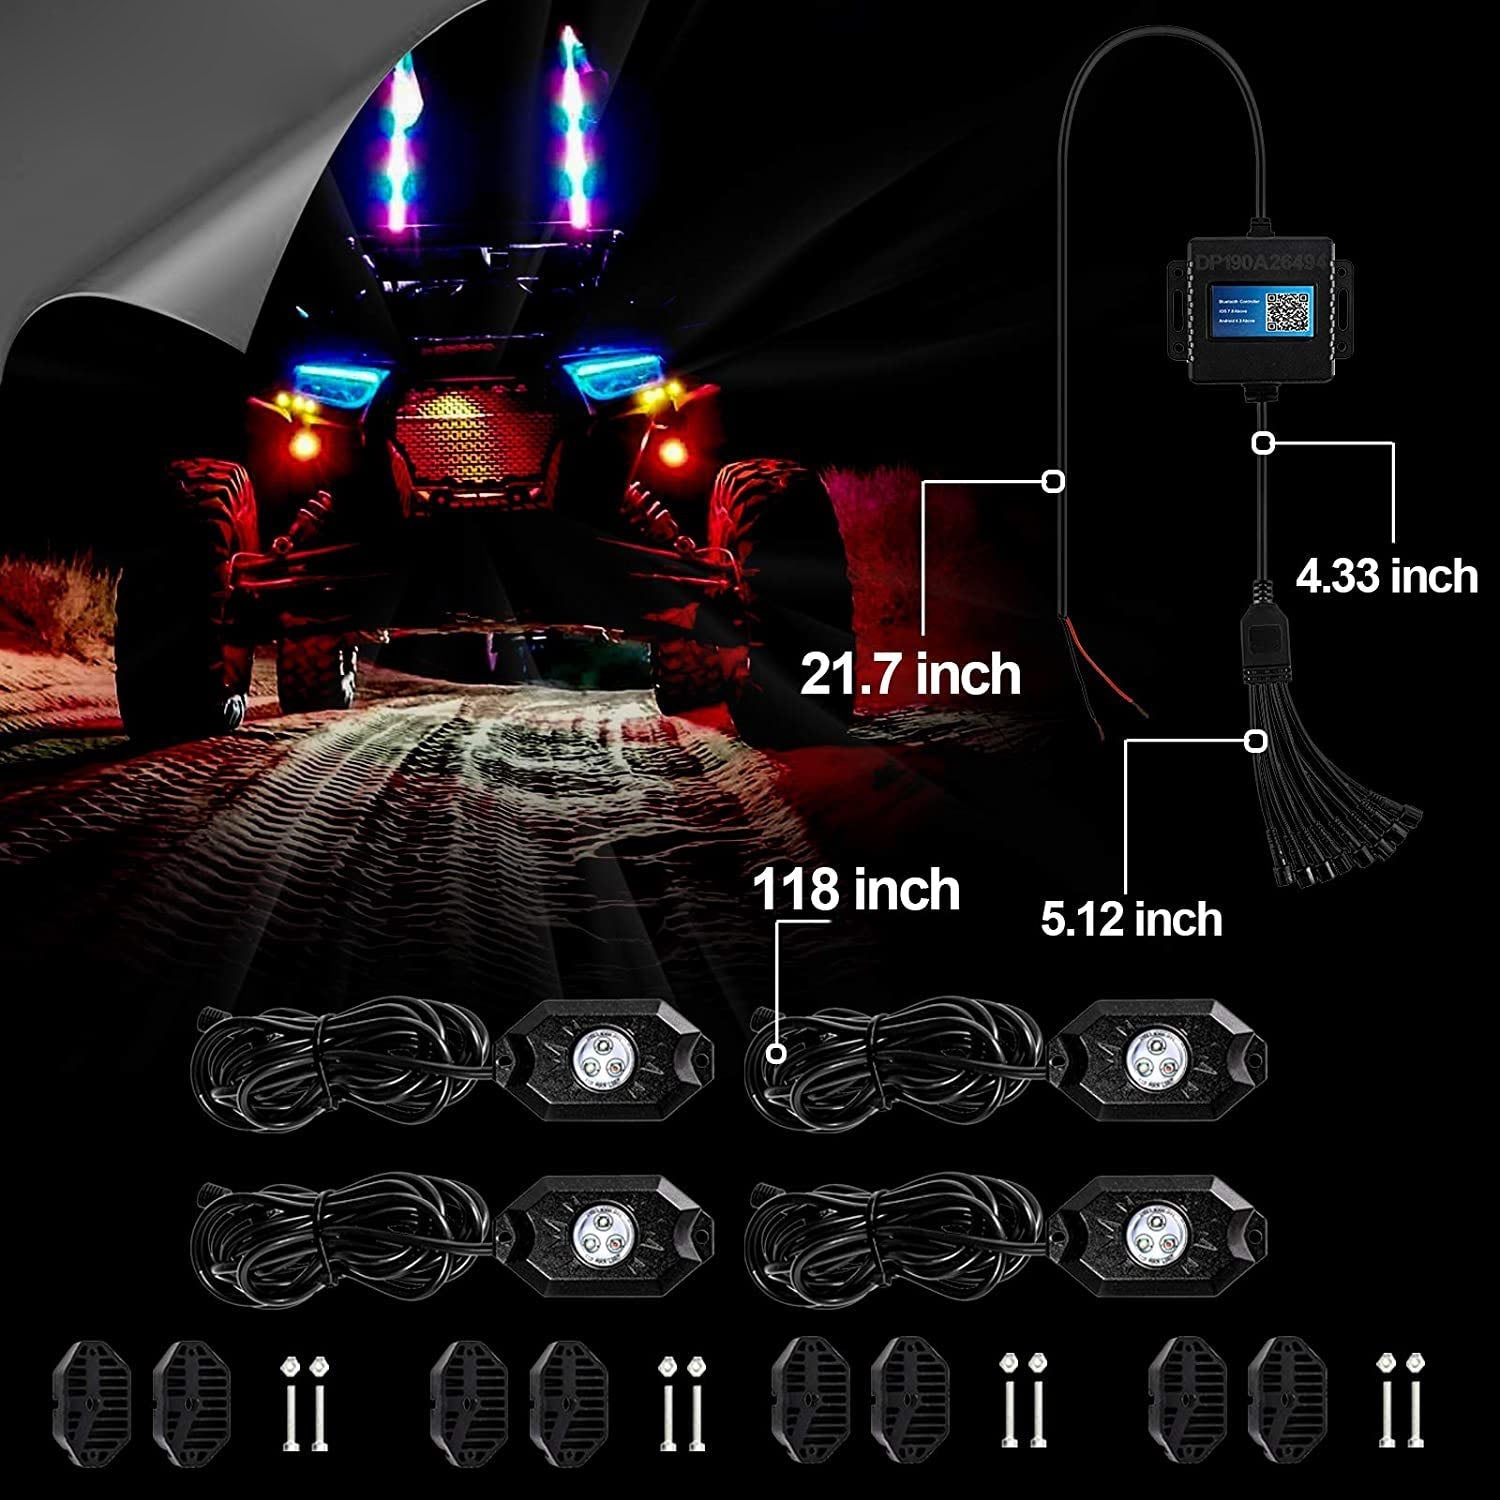 RGB LED Rock Light Set with Bluetooth Controller for GMC Sierra AT4 GMC Sierra 1500/2500/3500